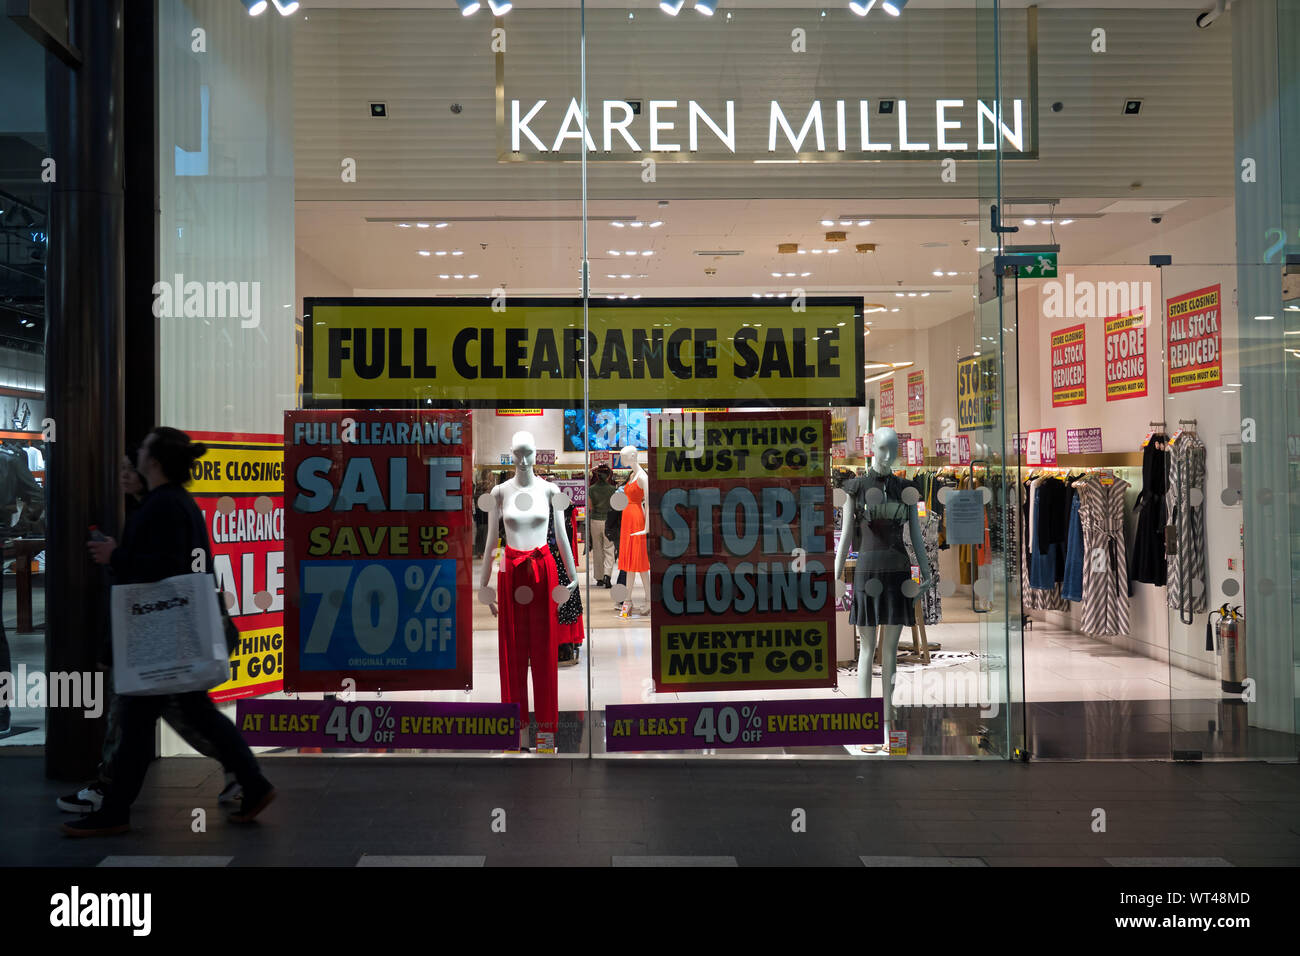 store closing and everything must go sale signs in the window of british womens clothing retailer karen millen in liverpool one shopping centre WT48MD